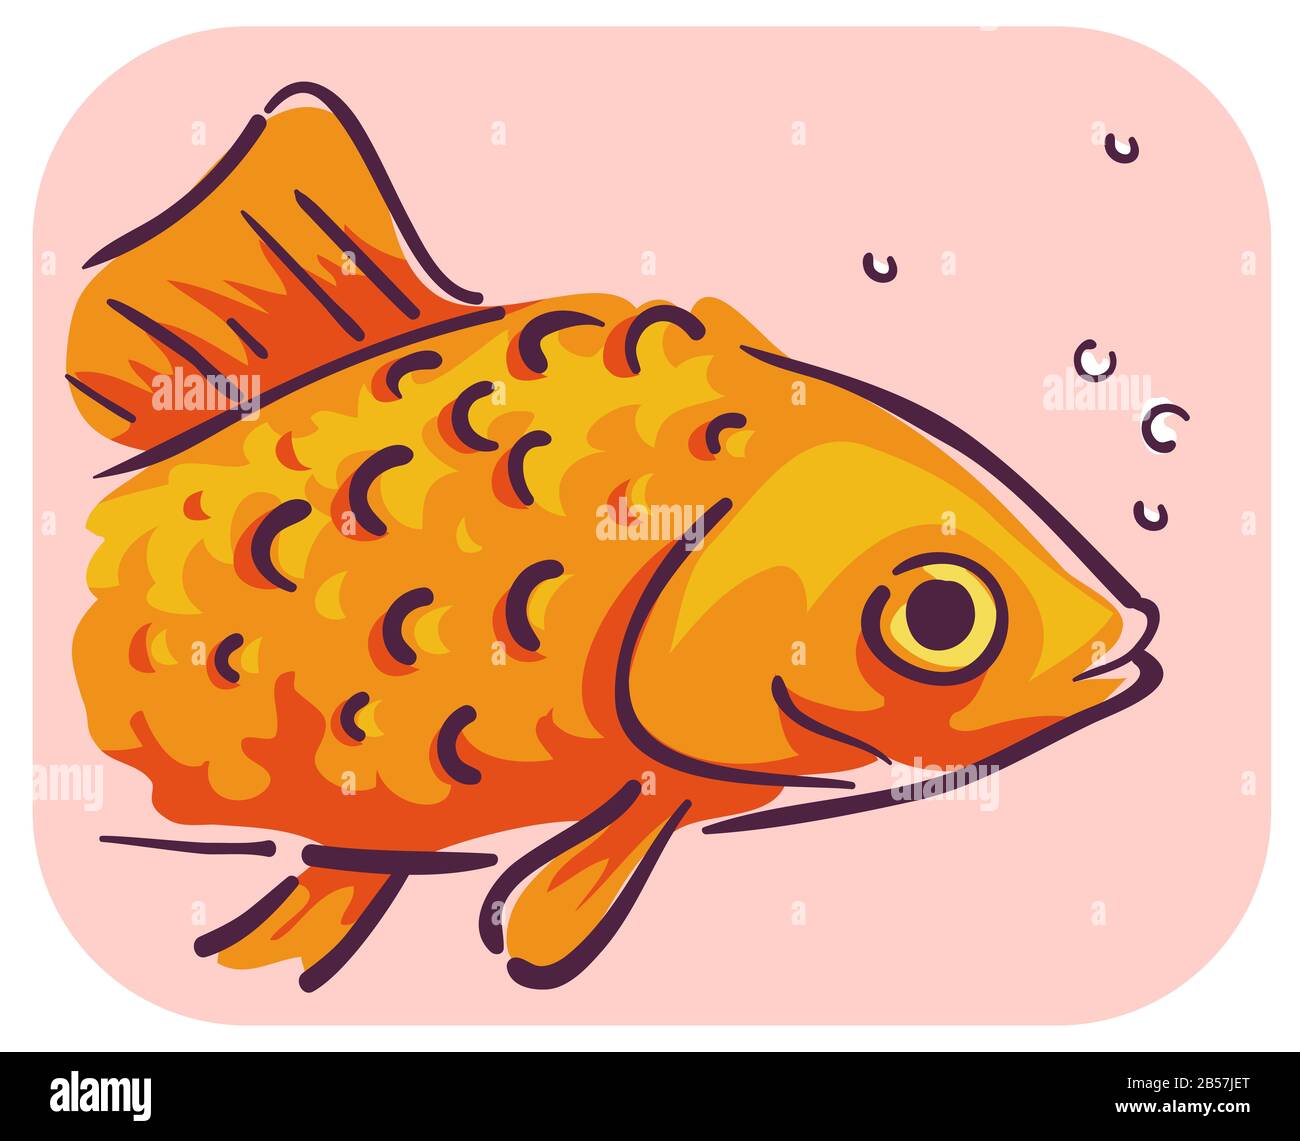 Illustration of a Pet Goldfish with Raised Scales, Symptom of Dropsy Stock Photo